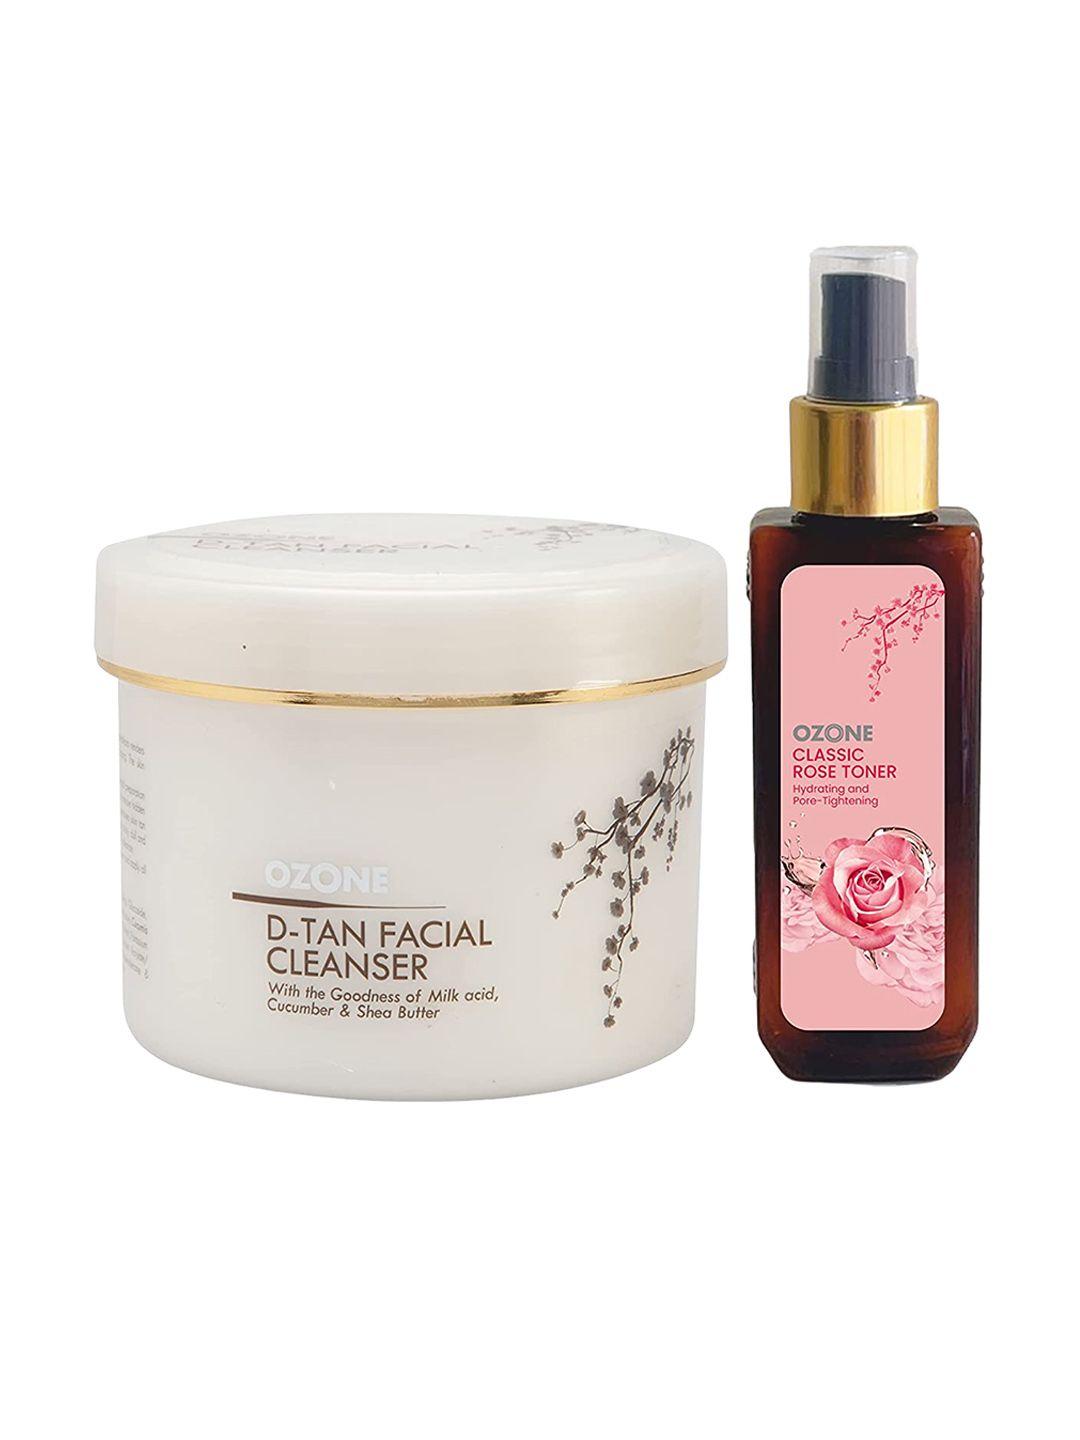 ozone d tan facial cleanser 250g with classic rose toner 100ml